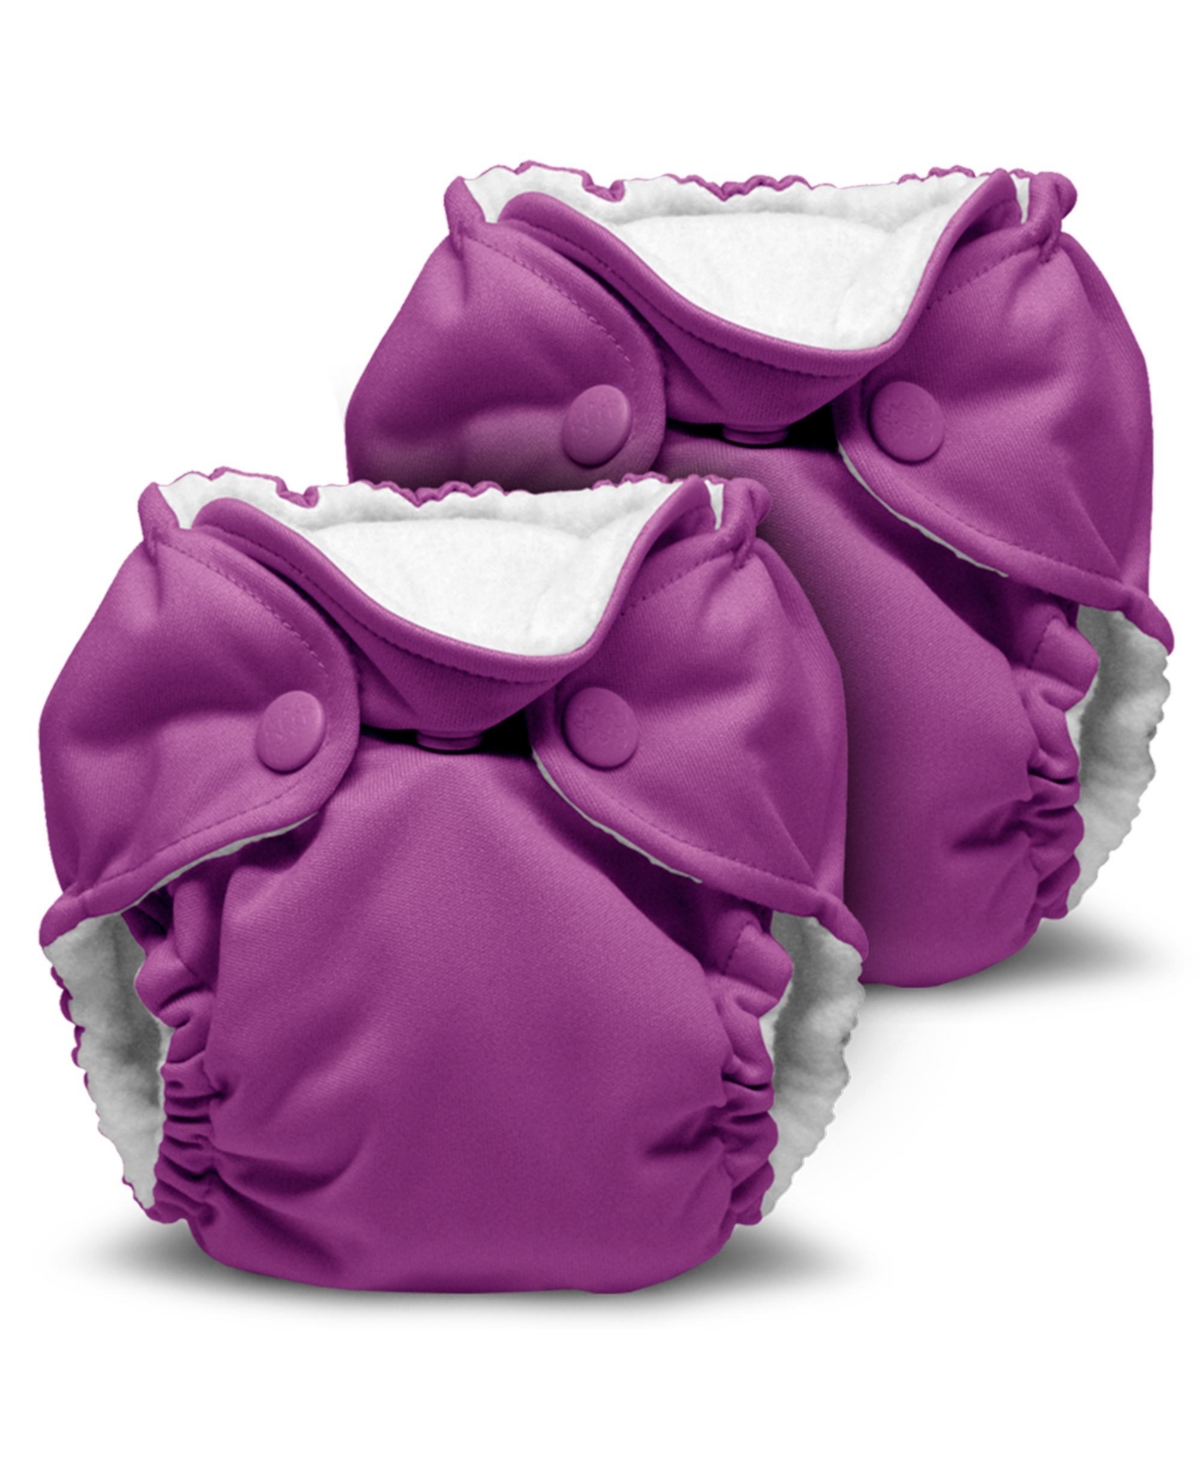 Kanga Care Babies' Lil Joey Newborn All In One Aio Cloth Diaper (2pk) In Orchid